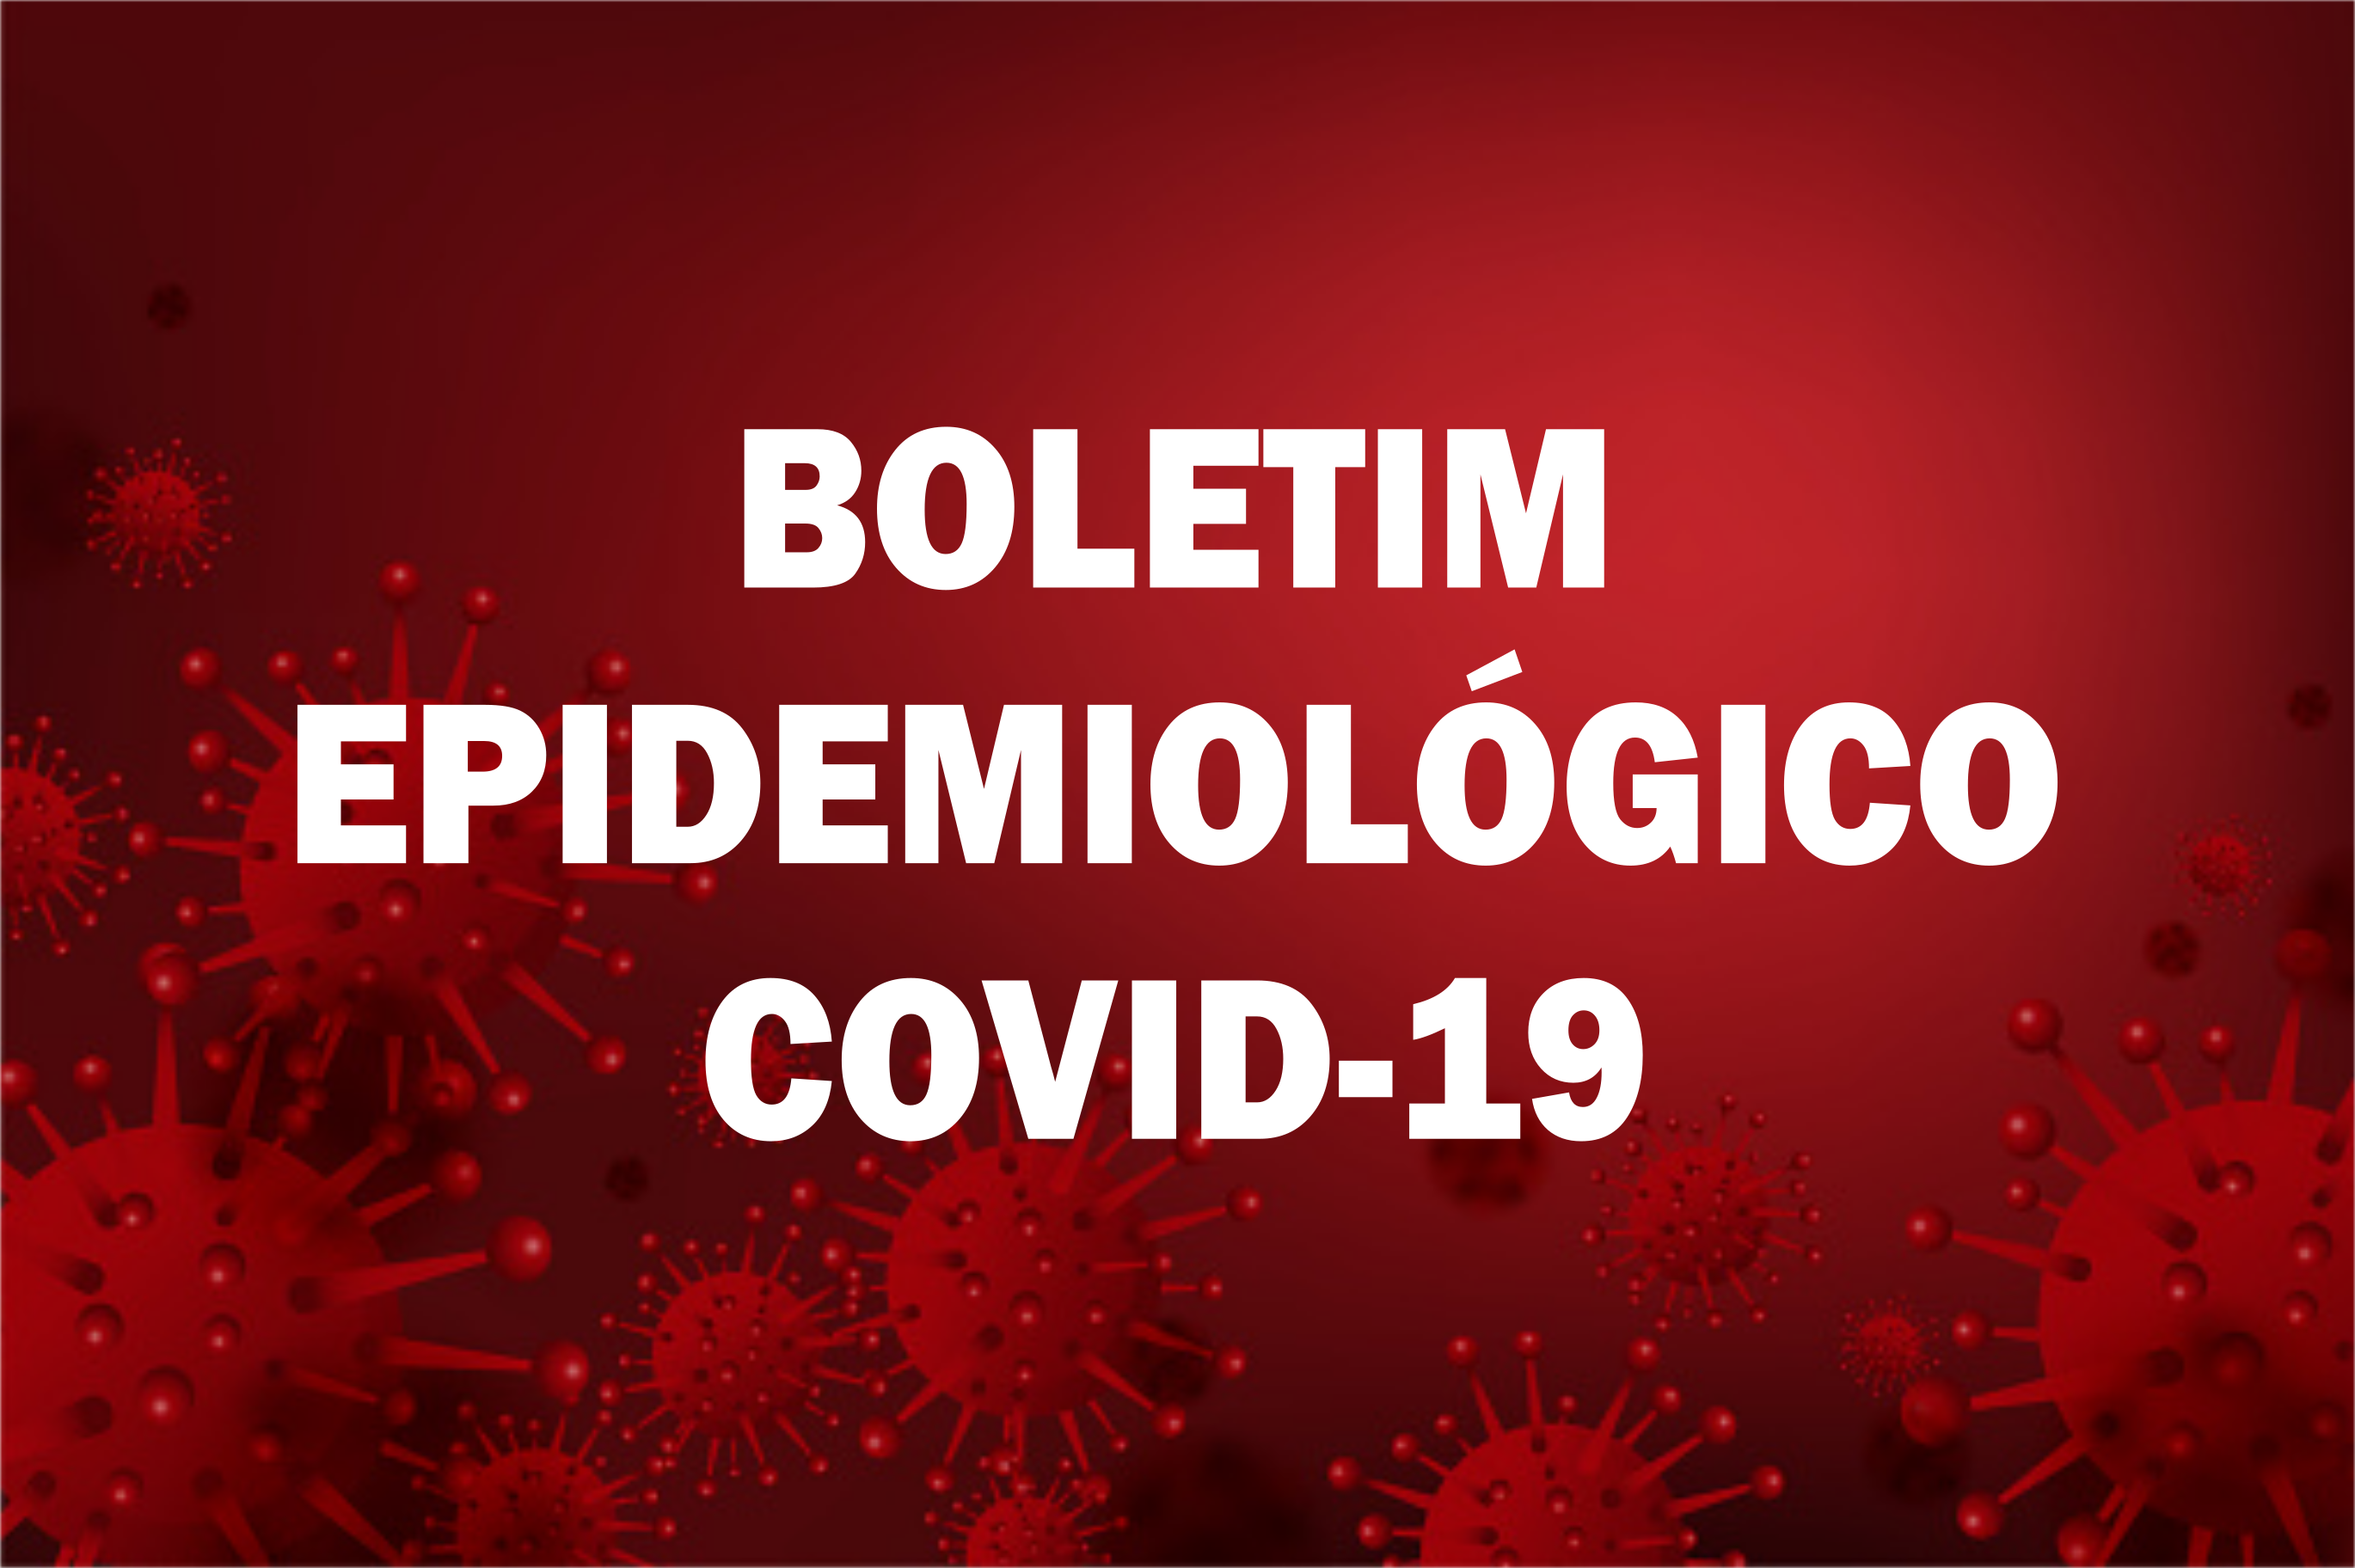 You are currently viewing BOLETIM EPIDEMIOLÓGICO COVID-19